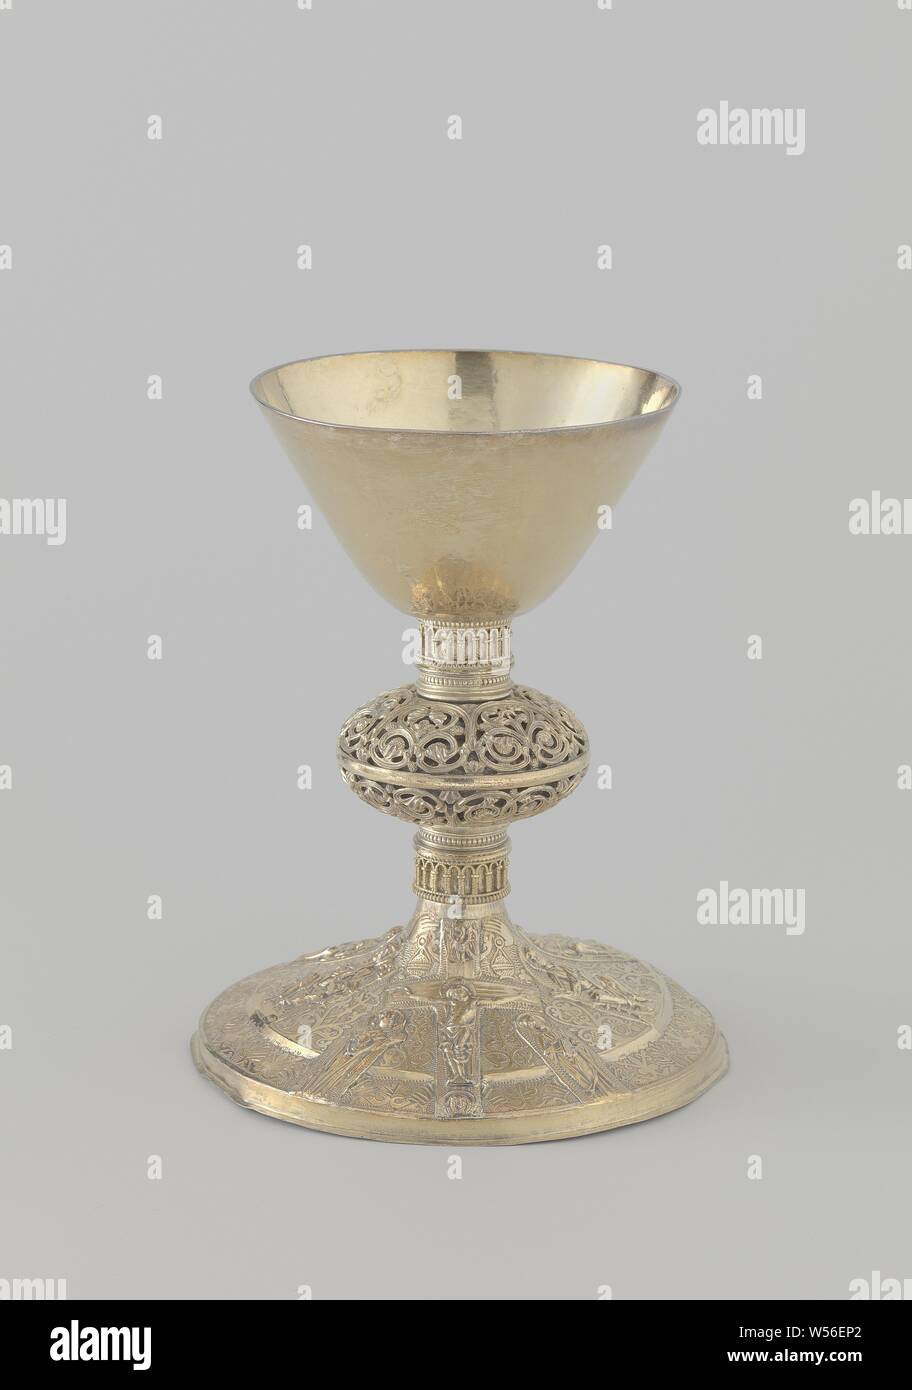 Chalice Chalice on a round base, decorated with a representation of Christ on the cross, Chalice of gilt silver, unadorned, funnel-shaped cuppa. On the round foot in stamping work: Christ on the cross between Mary and John and five sitting figures of saints. The nodus is adorned with ajour floral and vines ornament, the tribe has a round-arch frieze in filigree work both above and below the nodus, crucified Christ with Mary and John on either side of the cross, Holy Red, anonymous, Oost-Nederland, c. 1200 - c. 1299, silver (metal), gilding, h 18.5 cm × d 15.2 cm × w 462.0 Stock Photo